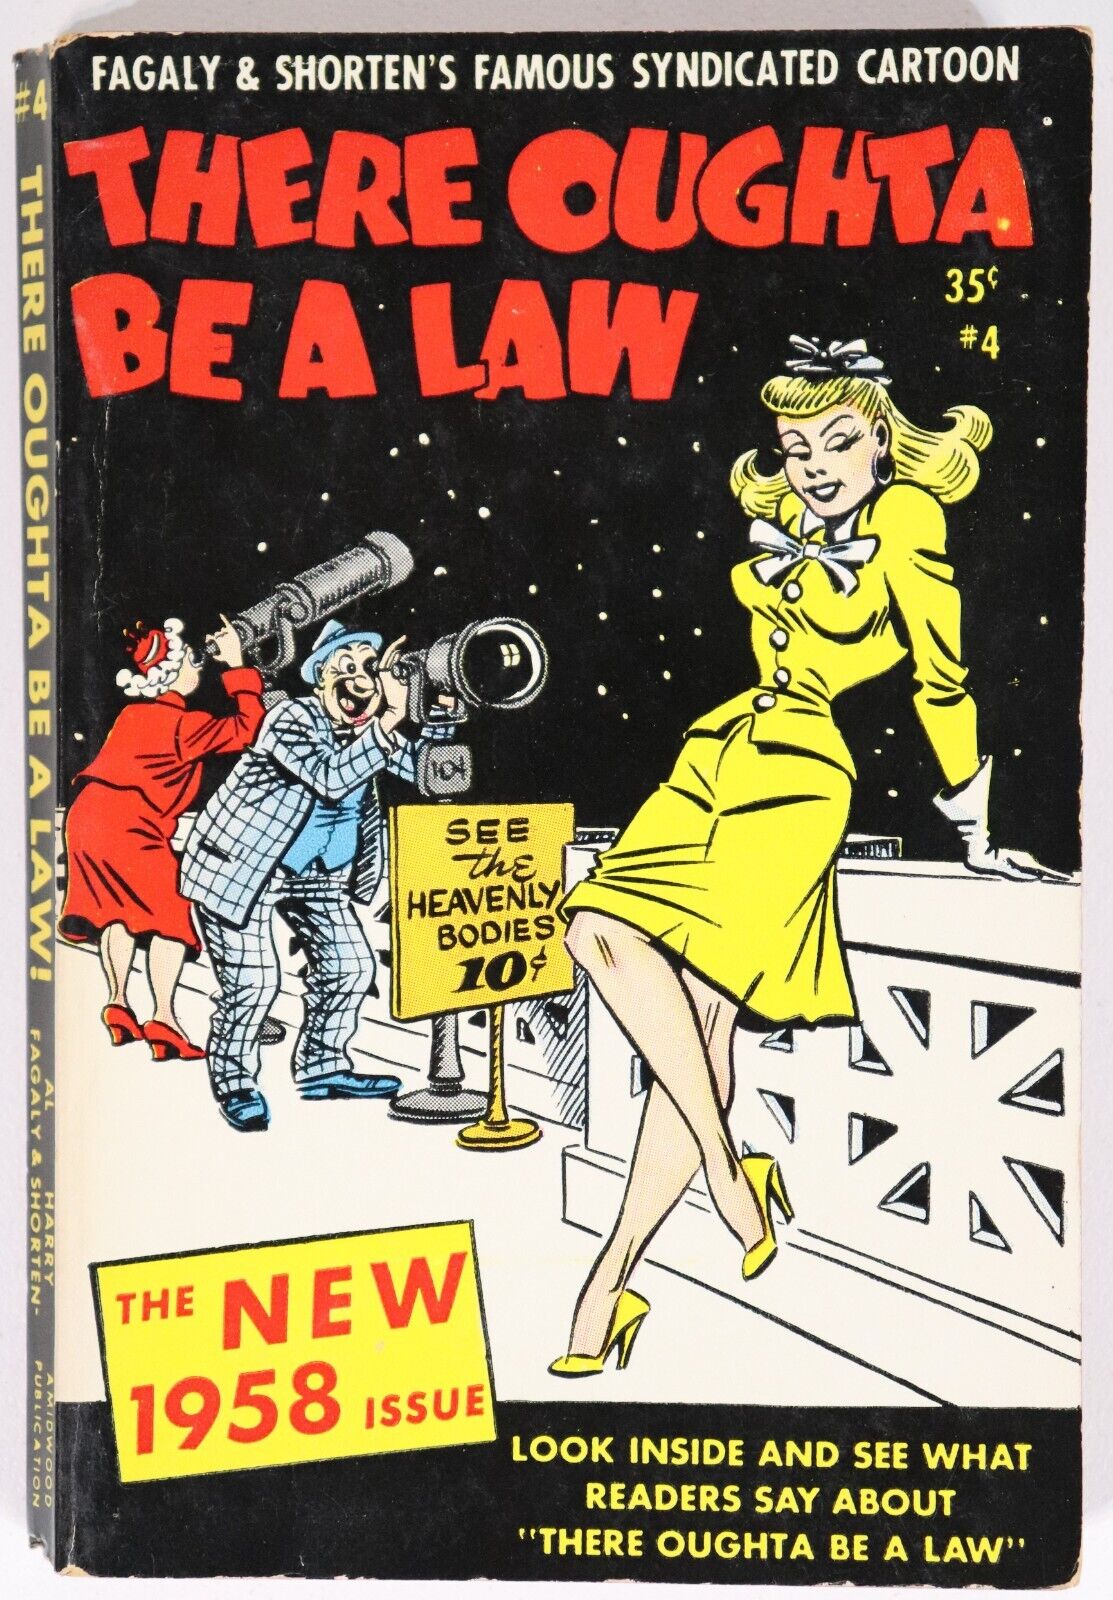 There Oughta Be A Law - 1958 - Vintage Cartoon Comedy Book